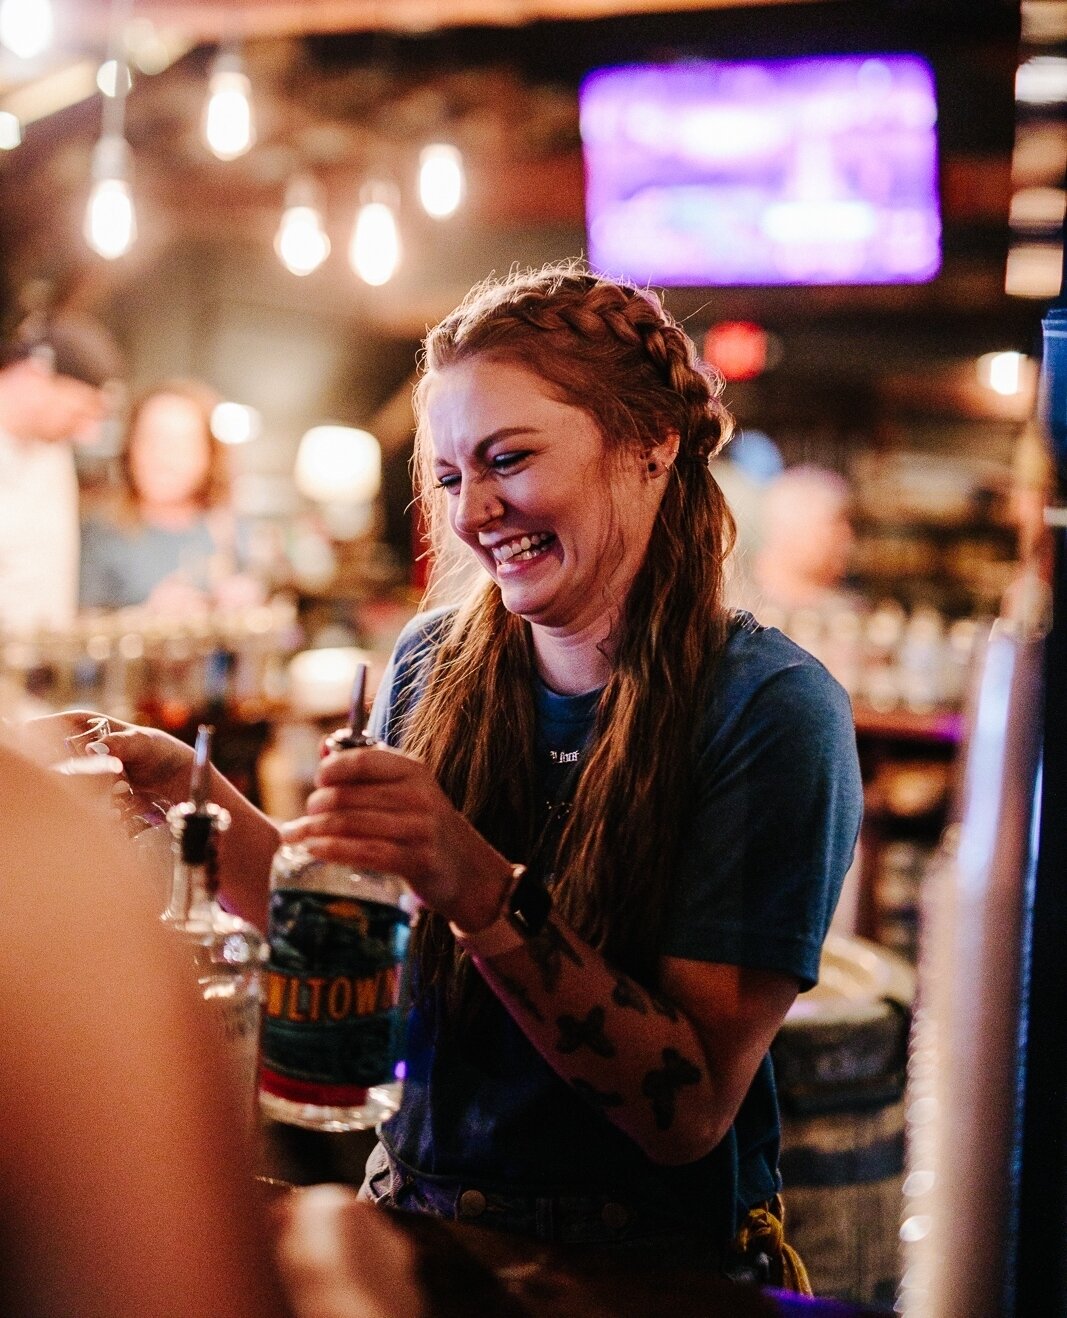 Quinn smiles when you sign up for the GDM Newsletter. And as soon as you sign up you get 10% off your next drink... it's a win-win all around.⁠
⁠
Start getting insider deals, amazing cocktail recipes, GDM updates, and event invites when you join the 